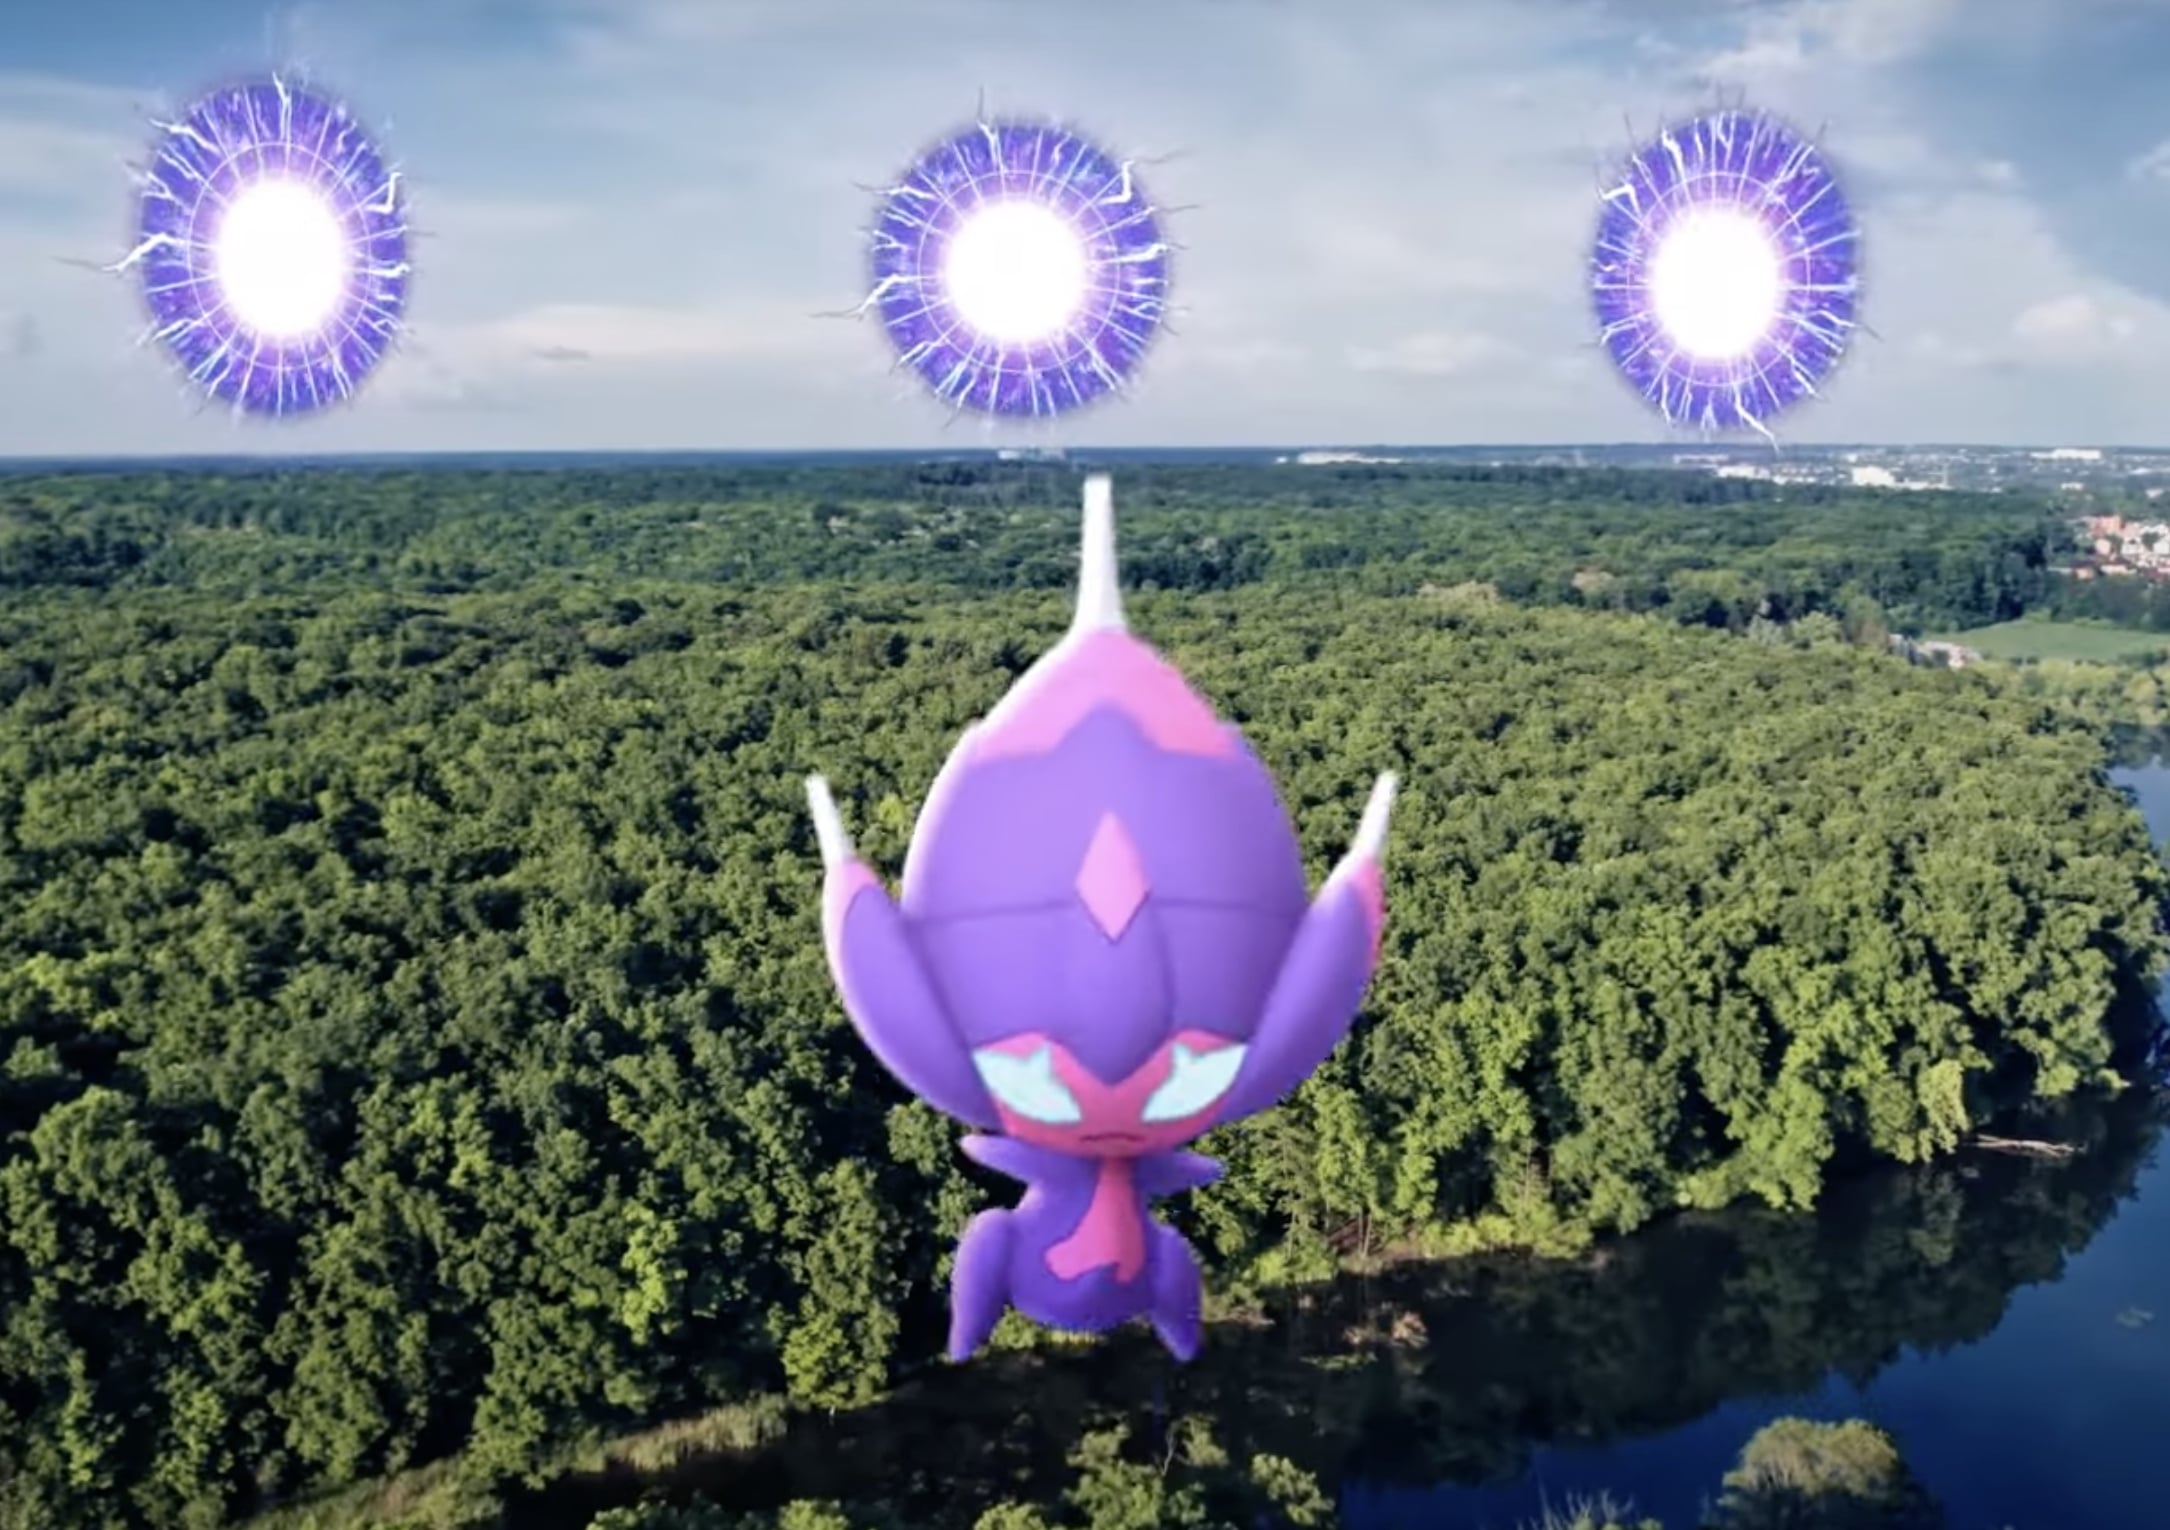 Players Amazed by Rare Pokémon Encounters in World of Wonders Event